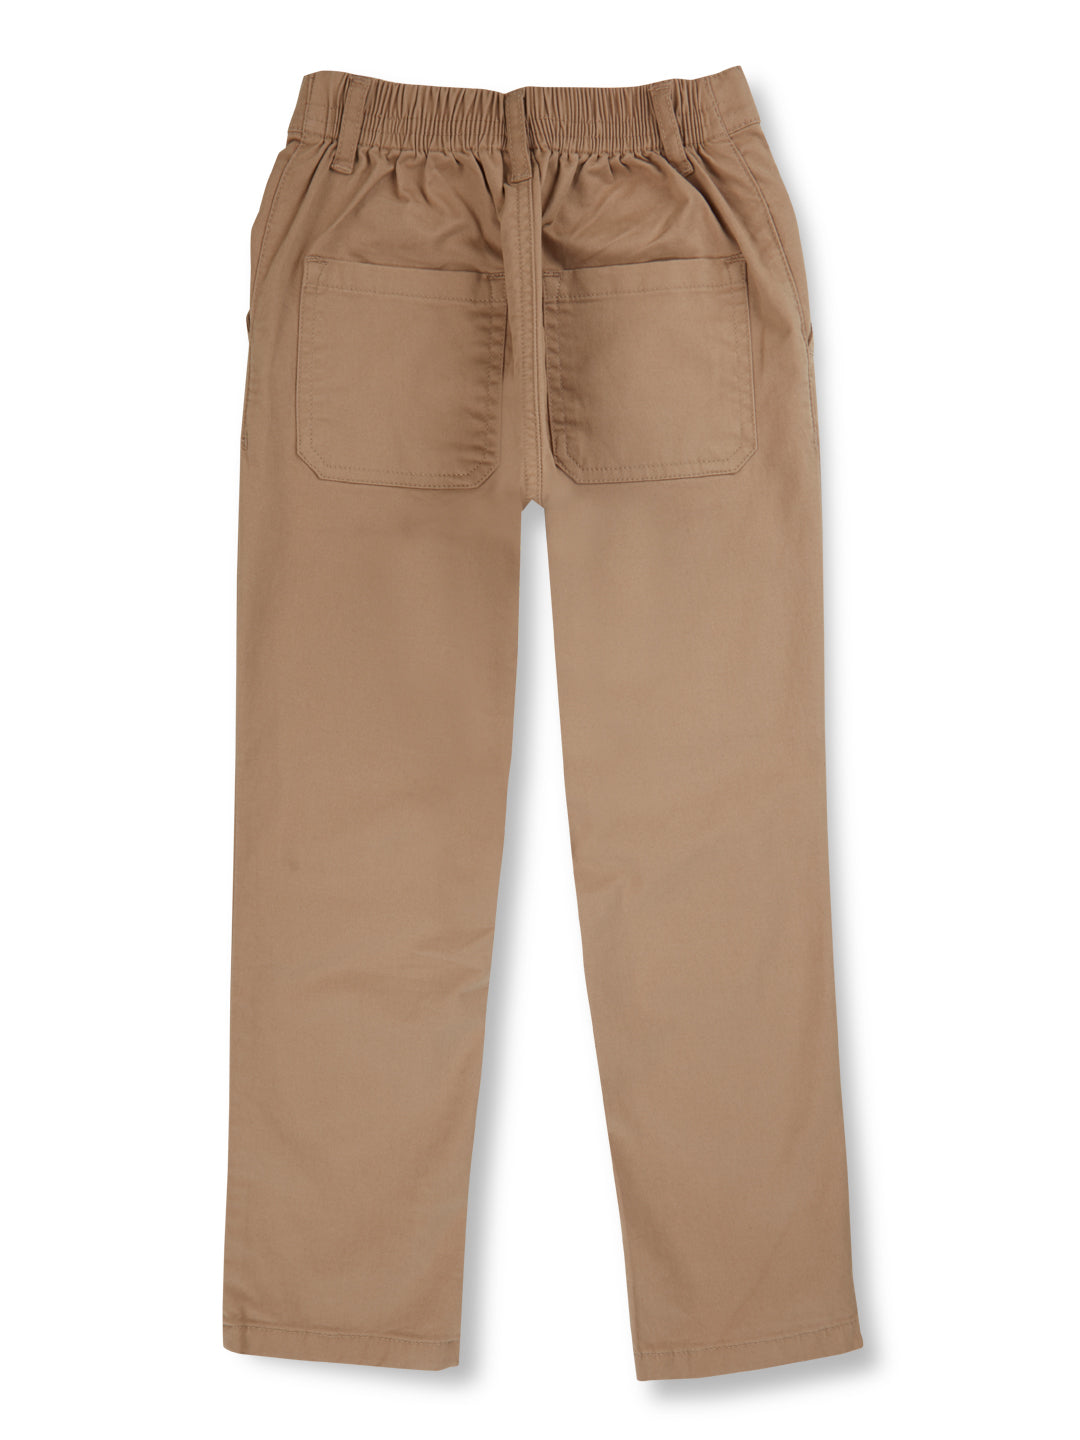 Boys Brown Solid Cotton Fixed Waist Trouser